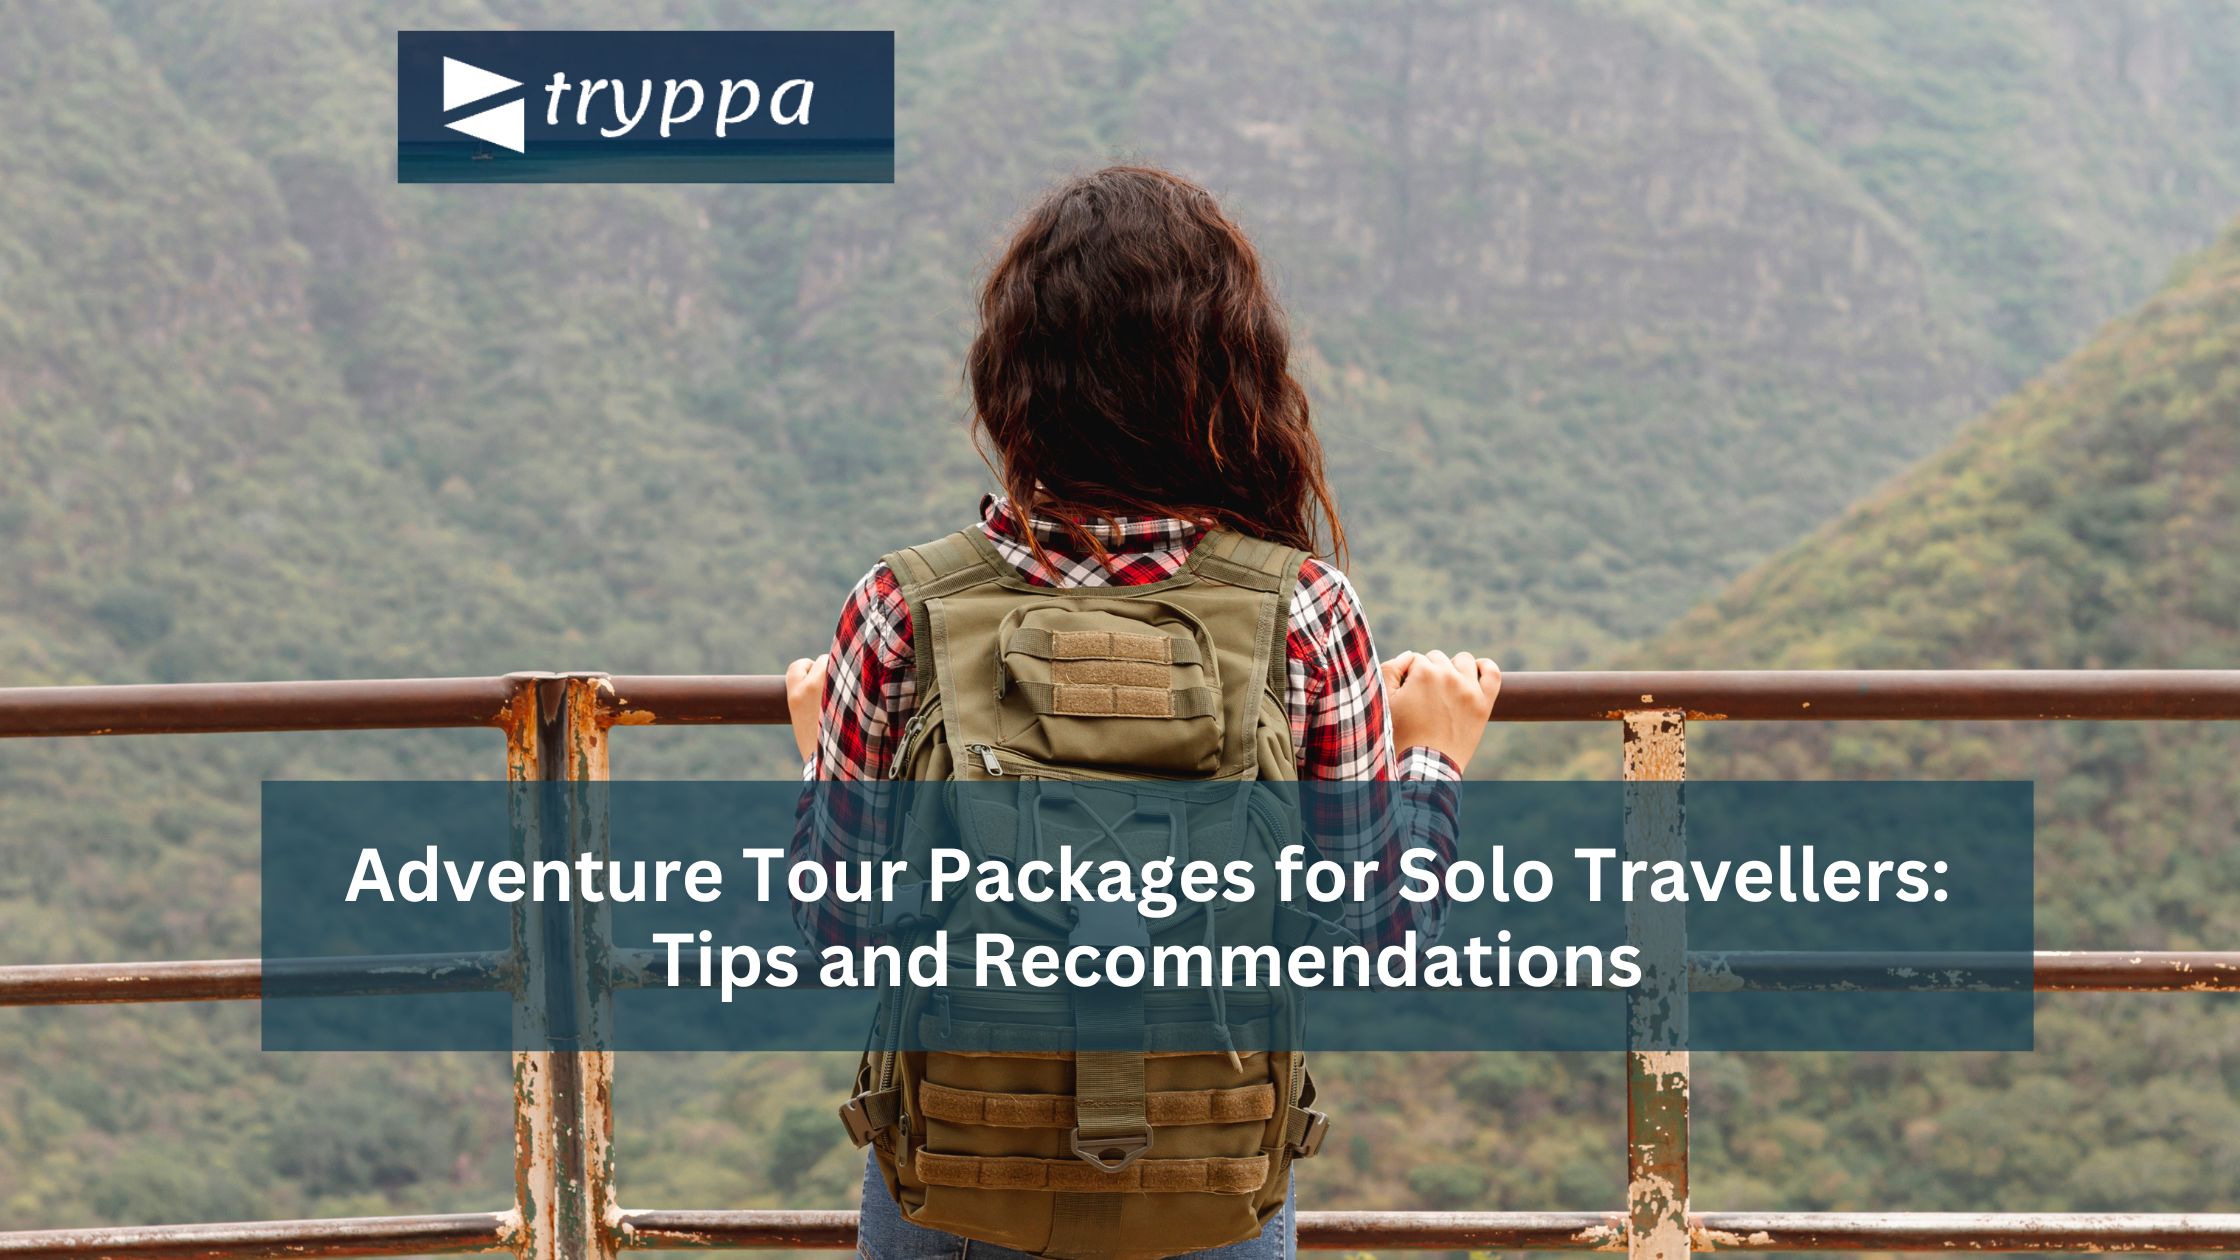 Adventure Tour Packages for Solo Travellers: Tips and Recommendations